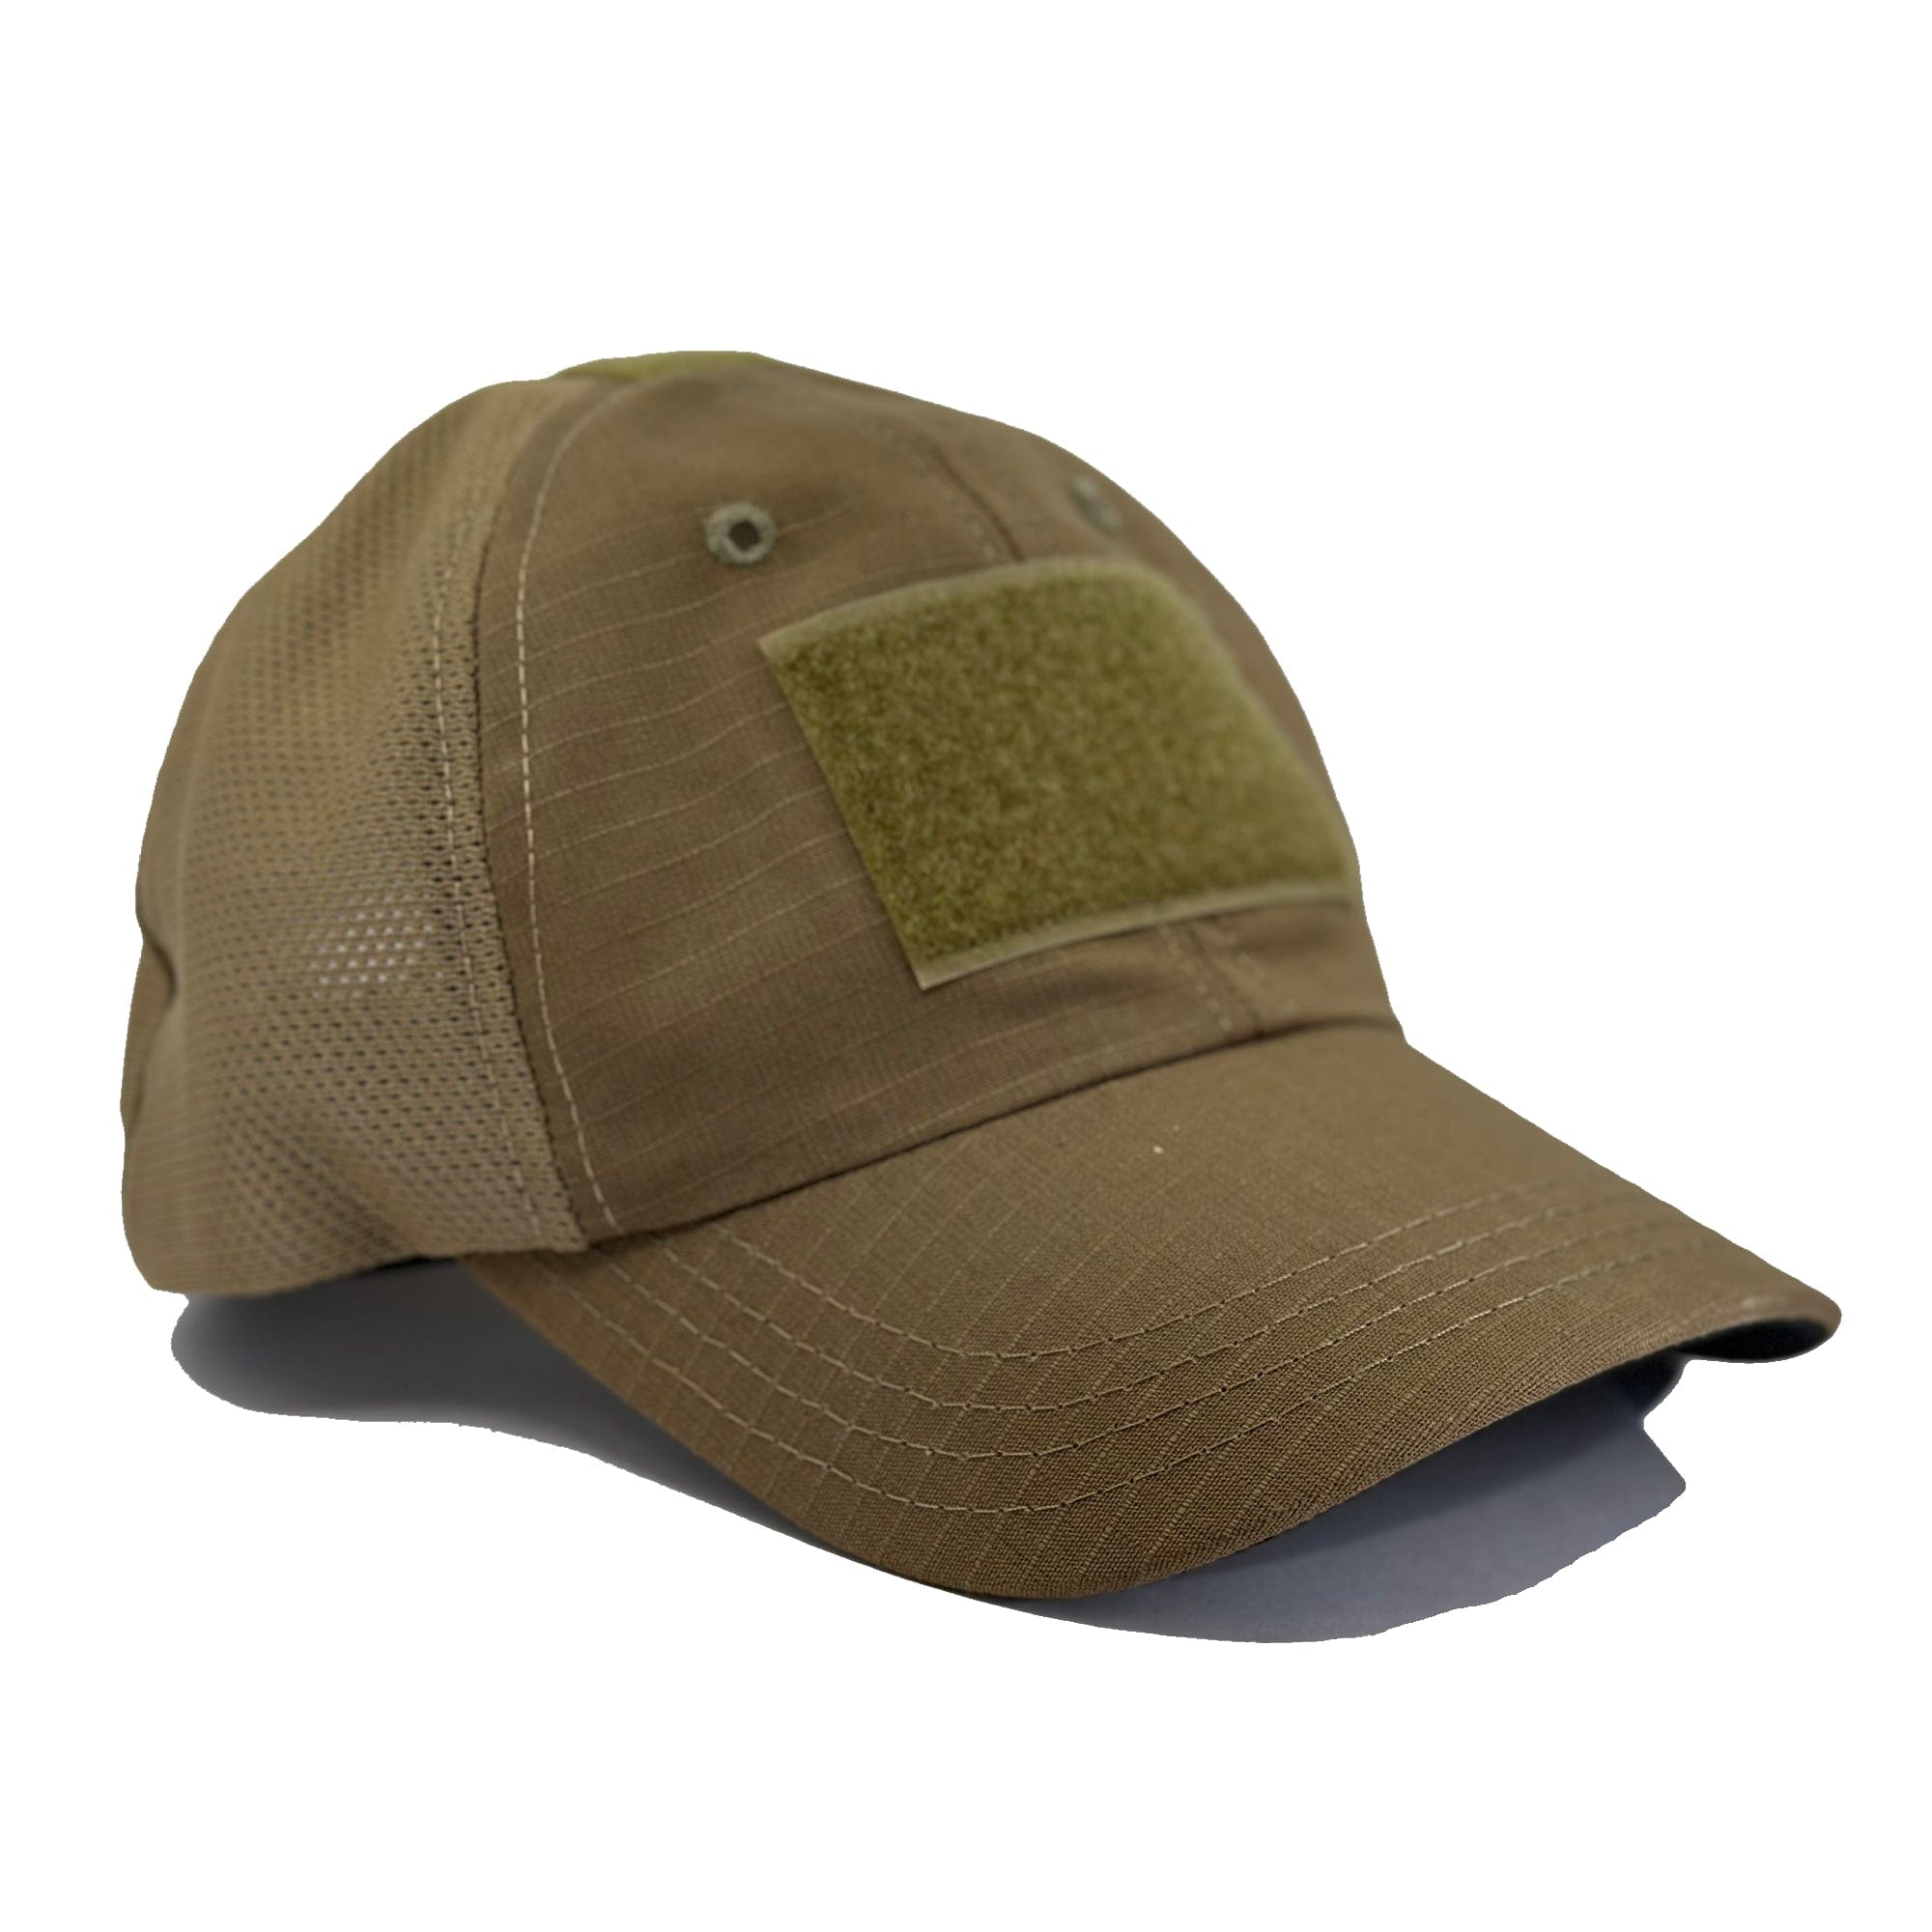 Tactical Gear Junkie Apparel Coyote Tactical Gear Junkie - American Made - Mesh Backed Operator Hat